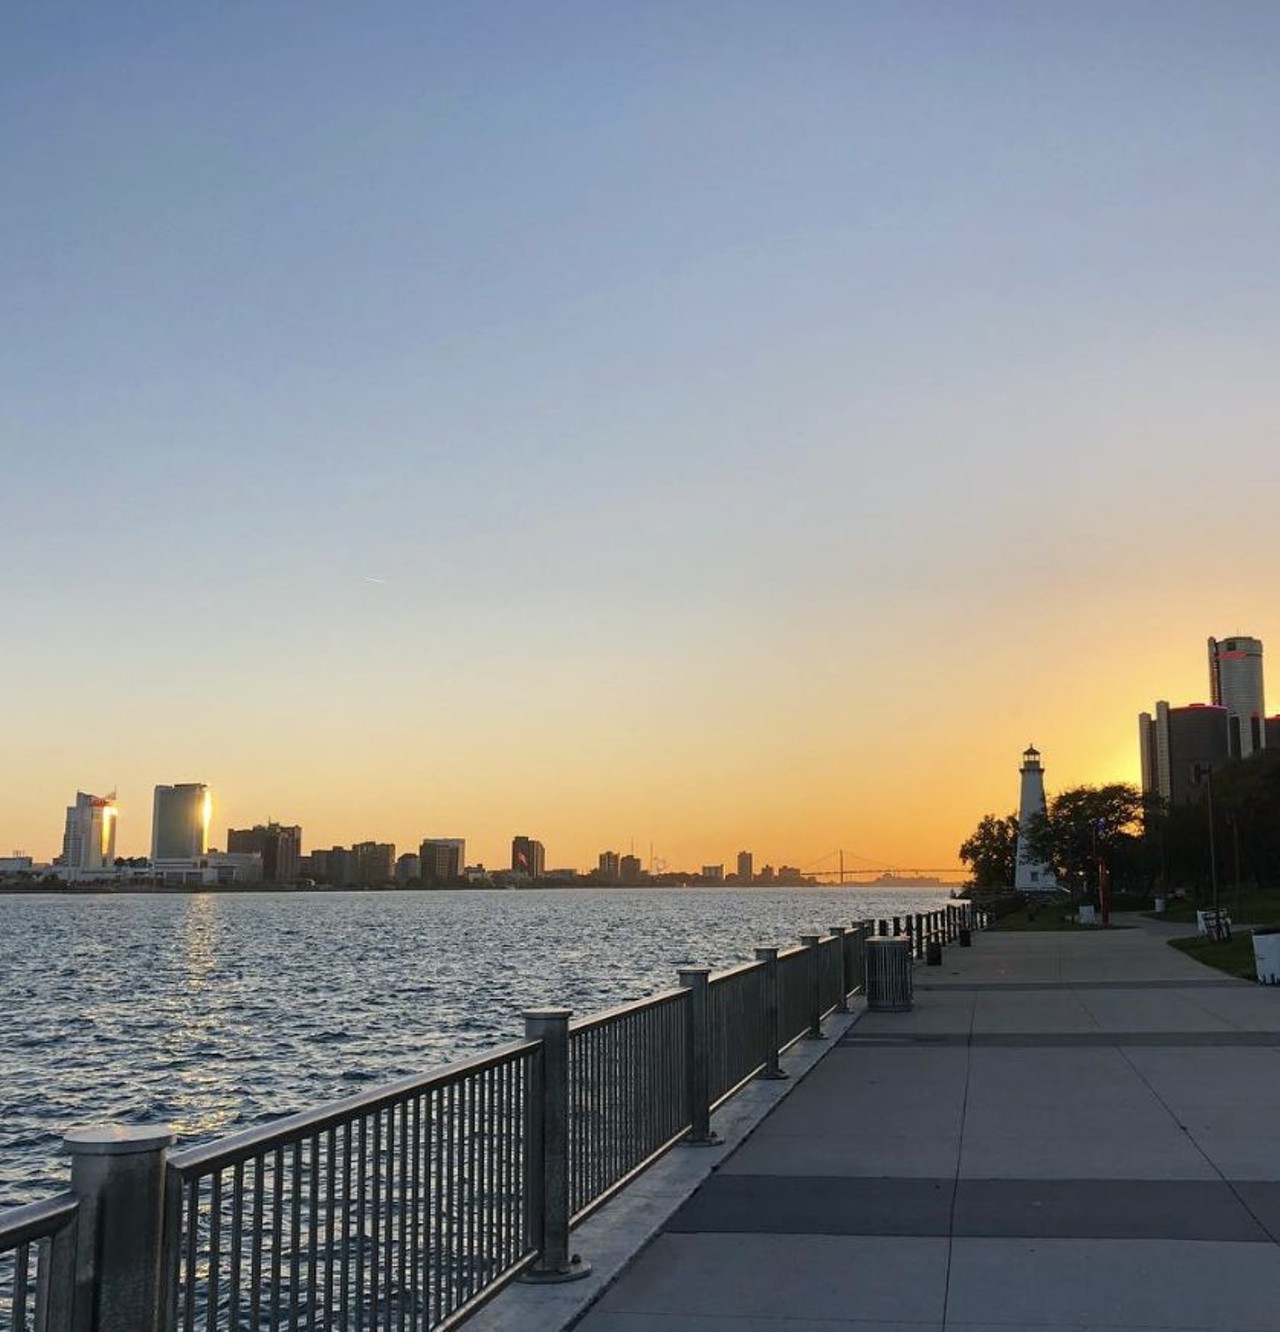 Posed on the Detroit Riverwalk
Detroiters really can see Canada from their backyards &#151; or Riverfront. Chances are you have a picture in front of the Renaissance Center or strategically positioned so Windsor&#146;s Caesars Casino is just behind you.
Photo courtesy of @northrosedalestory